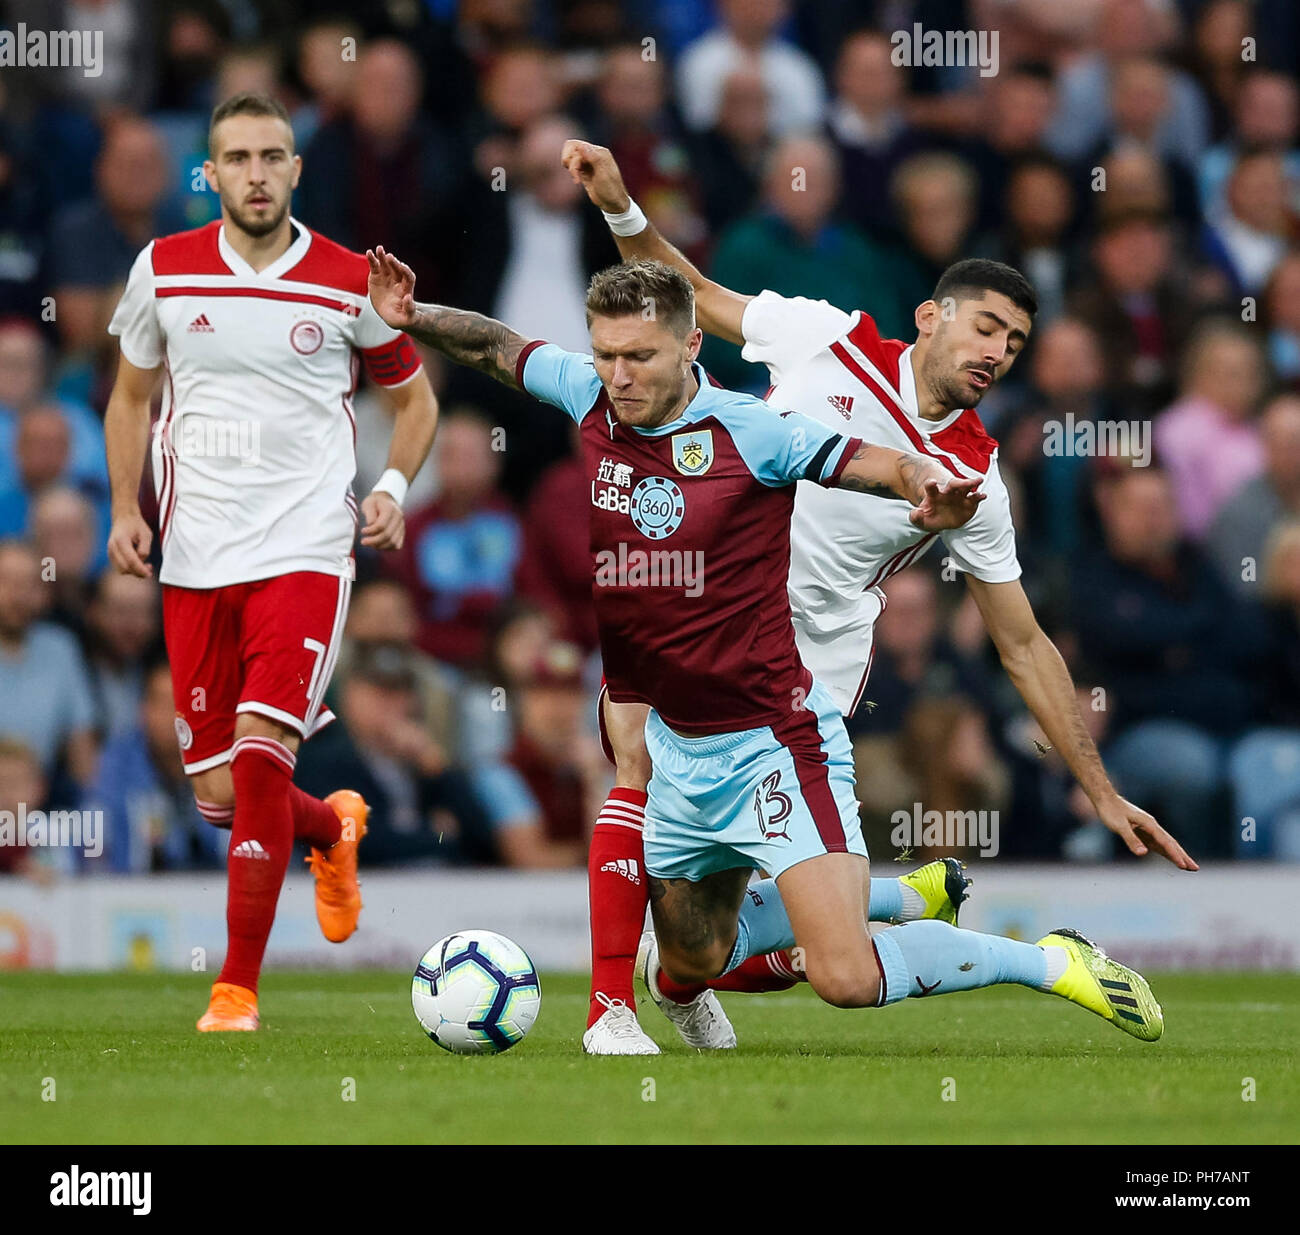 Burnley, UK. 30th August 2018. Jeff Hendrick of Burnley during the UEFA  Europa League Play-Off Round second leg match between Burnley and Olympiakos  at Turf Moor on August 30th 2018 in Burnley,